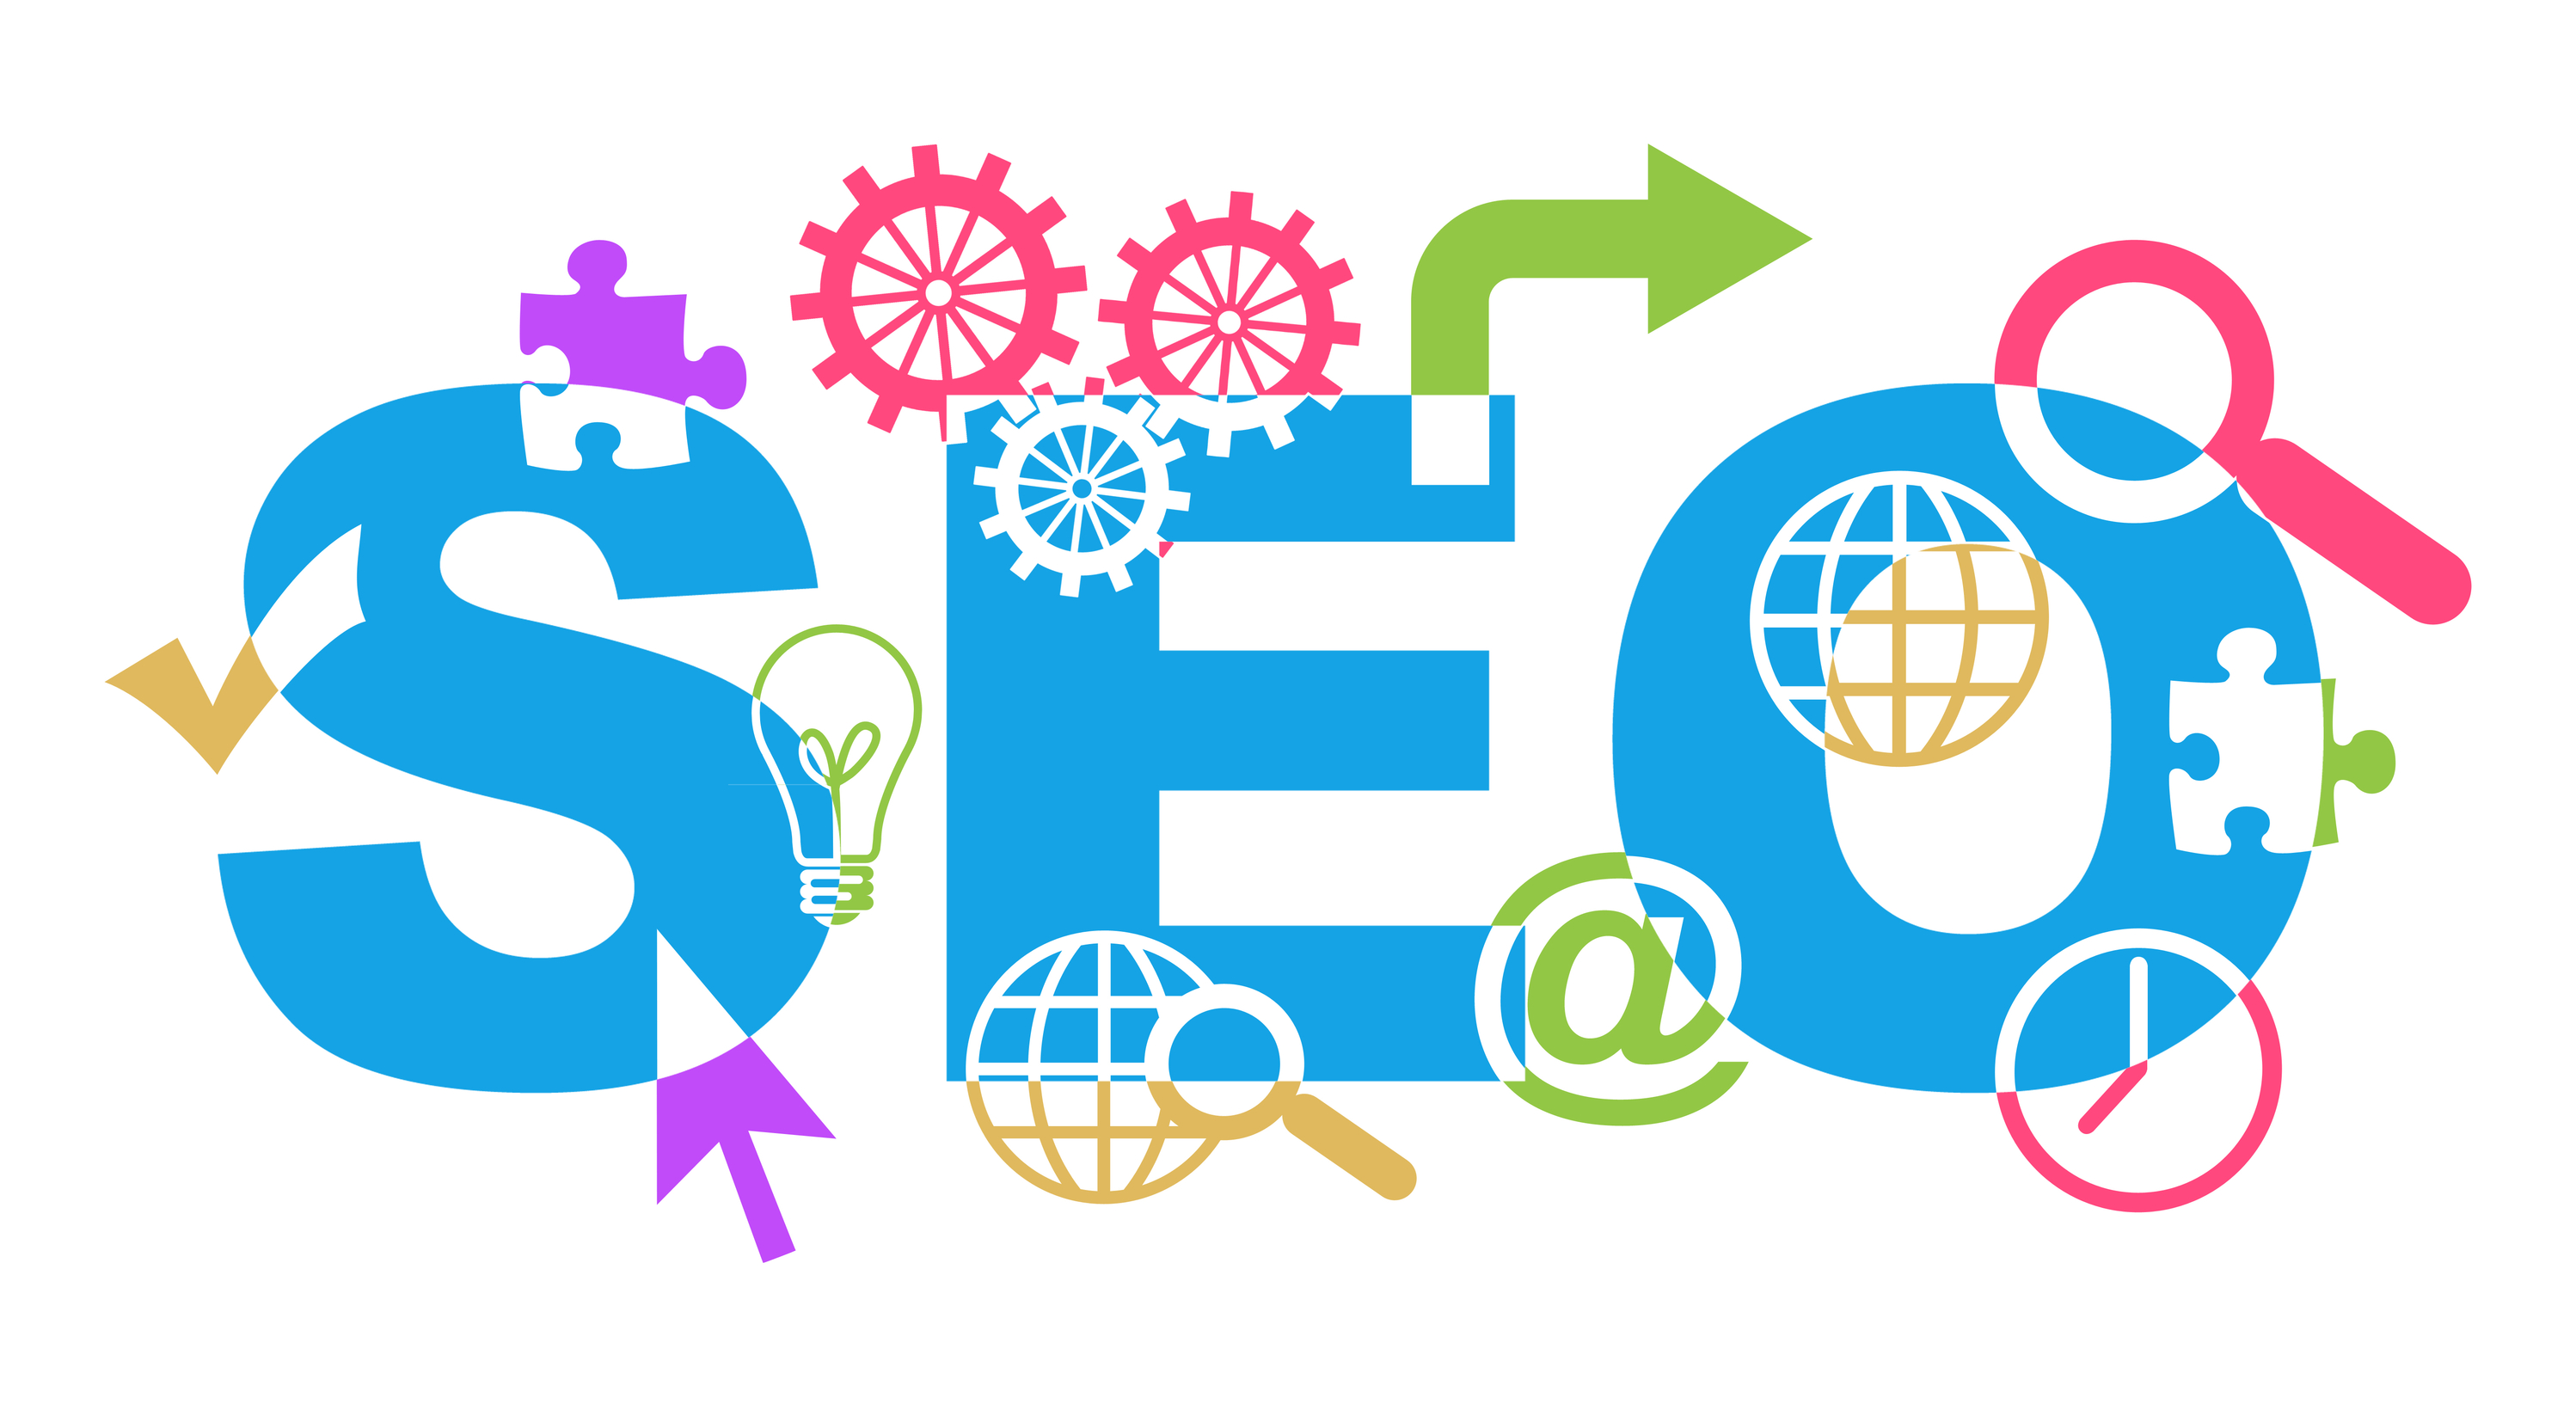 Top 5 SEO tips that will improve your website